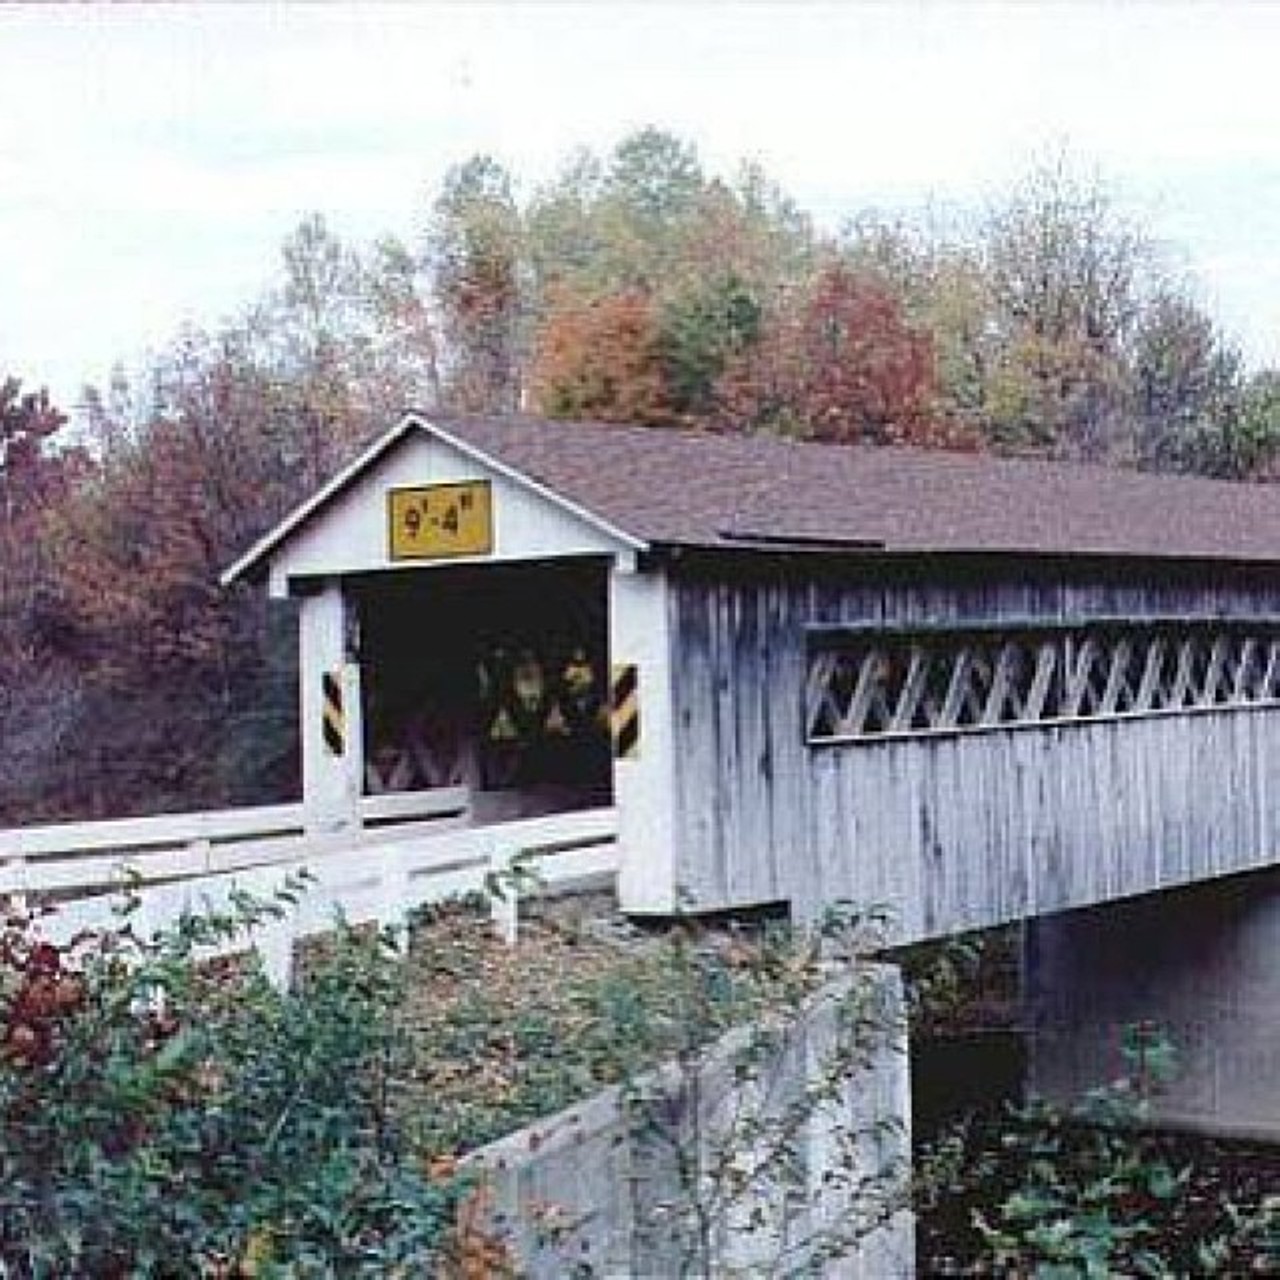 Ashtabula has 18 covered bridges that all offer dramatic views of autumn. Root Road Bridge, pictured above, is a beautiful juxtaposition of man-made structure and nature.